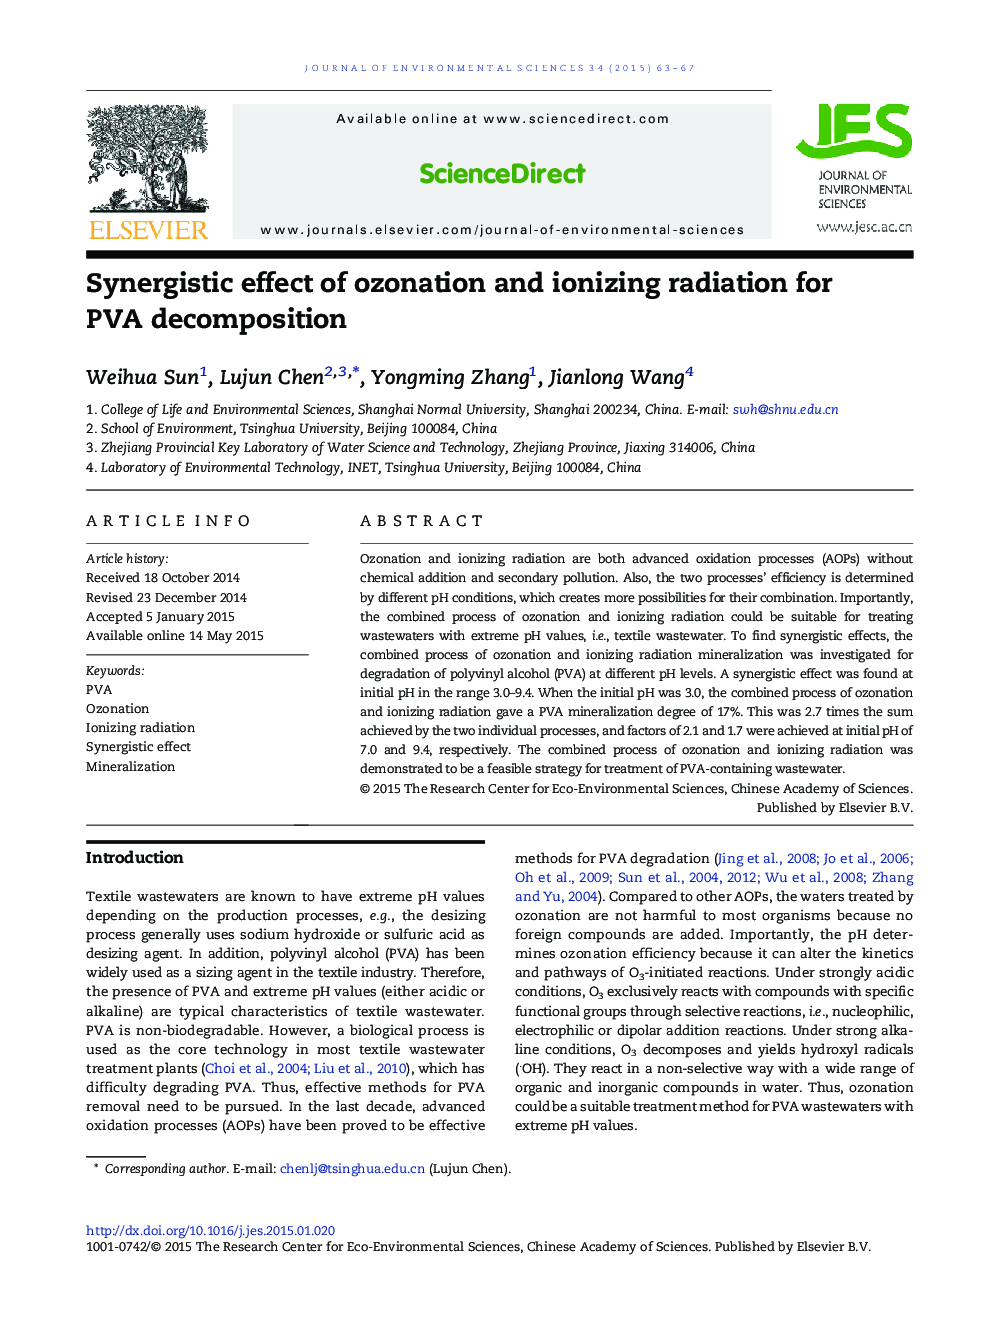 Synergistic effect of ozonation and ionizing radiation for PVA decomposition